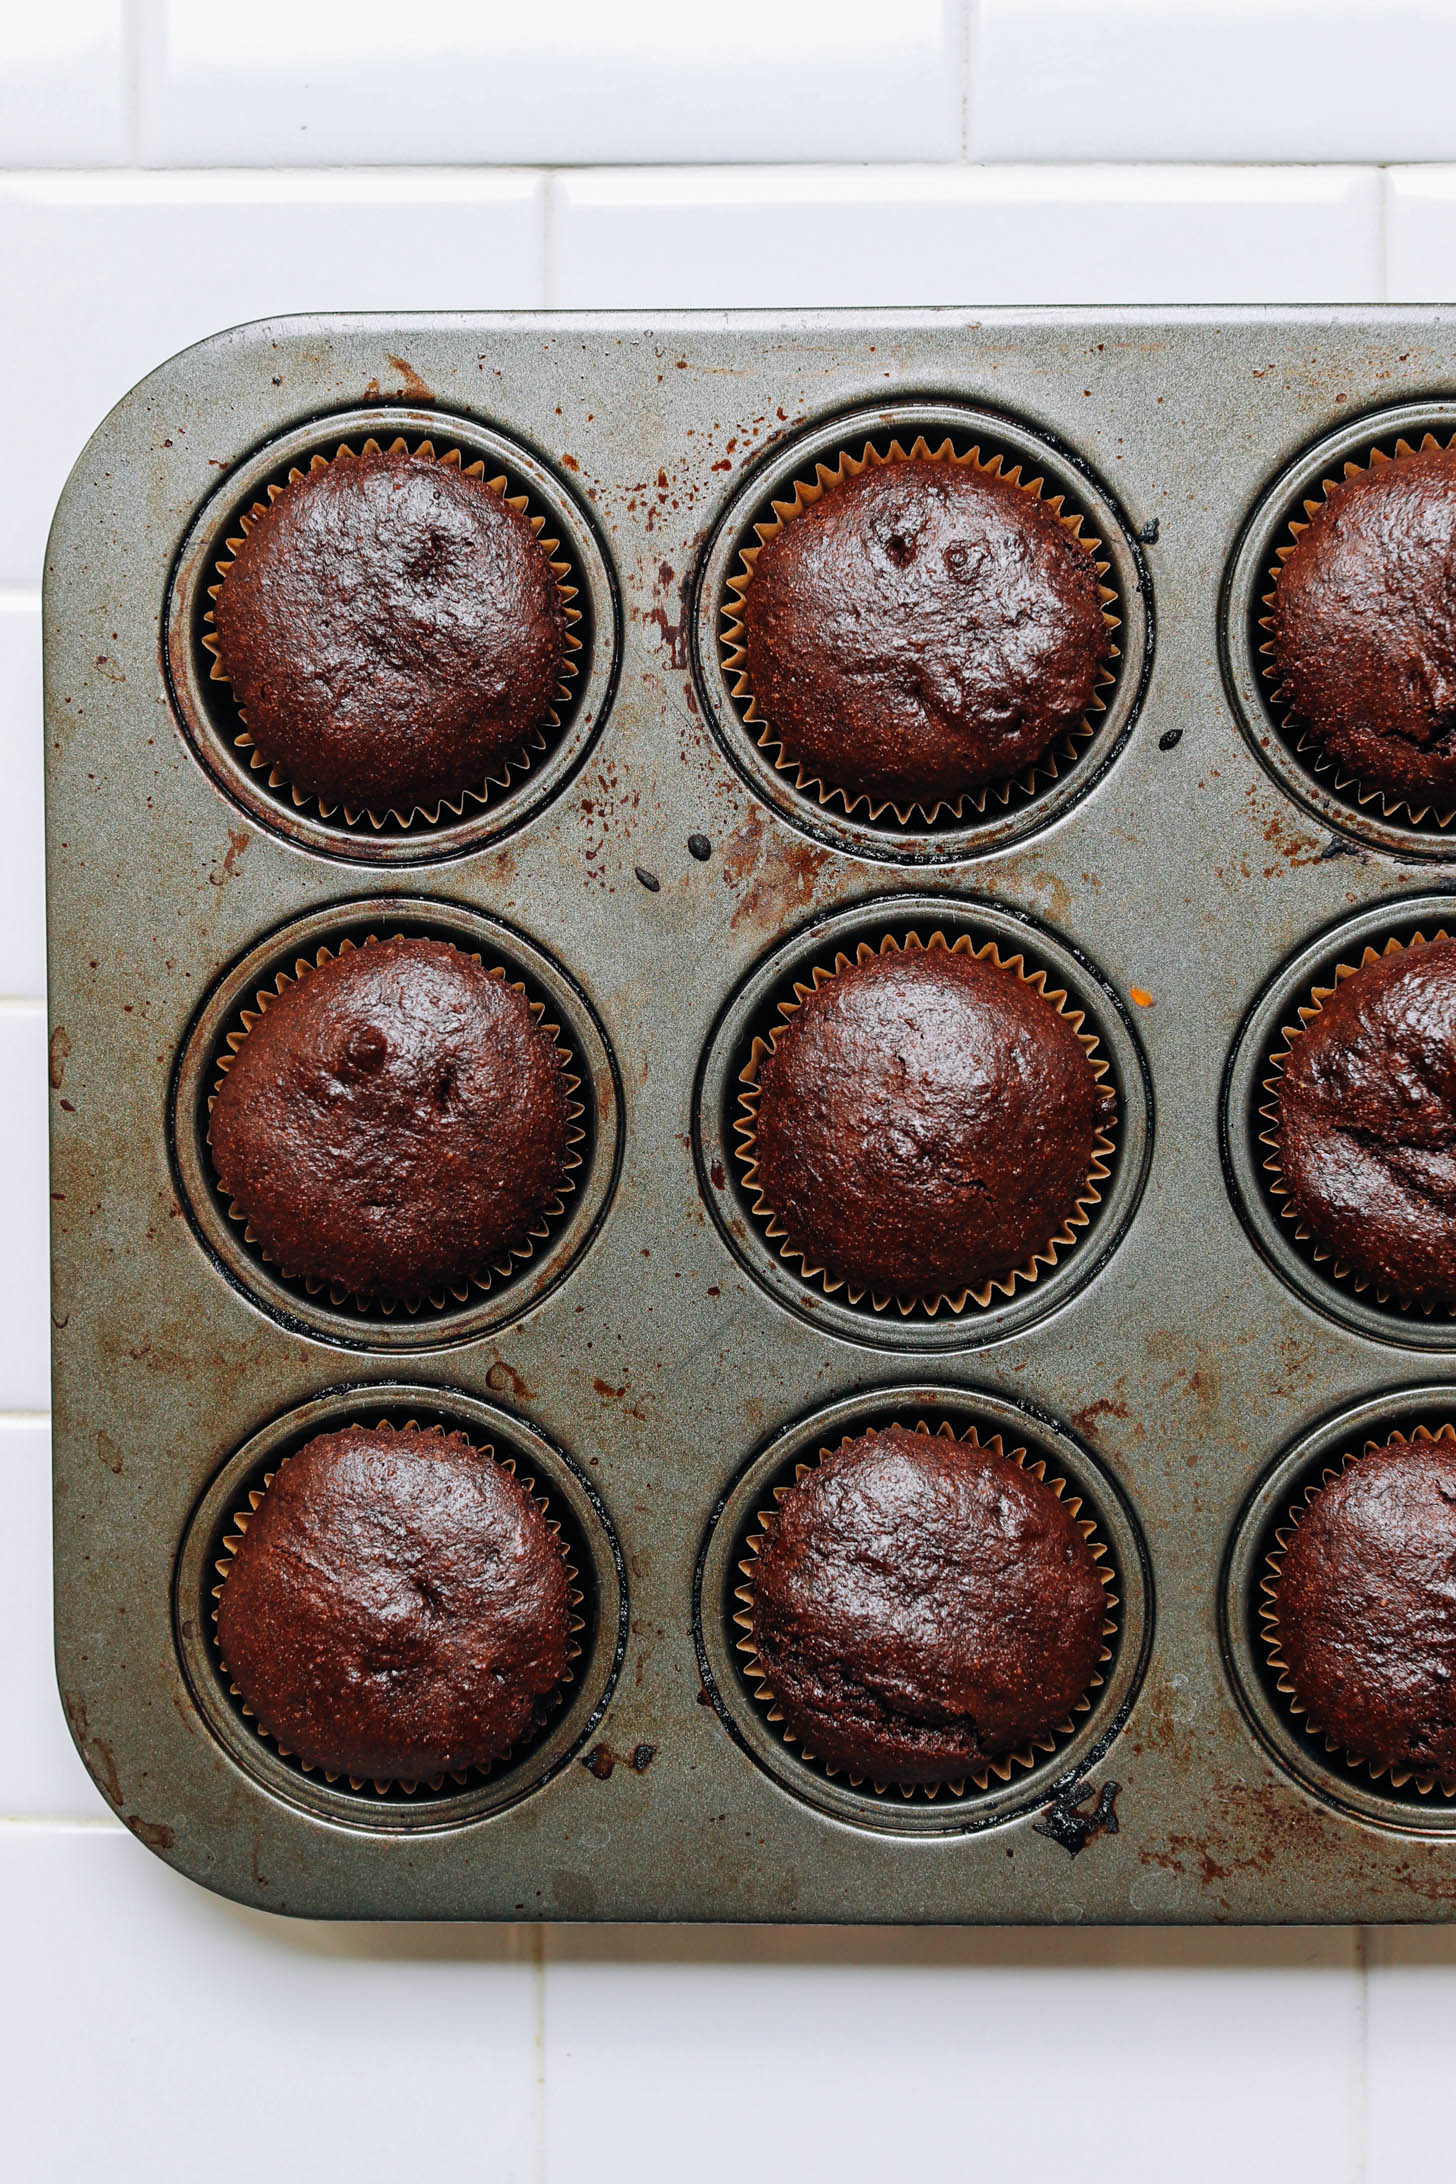 Chocolate cupcakes in a muffin tin